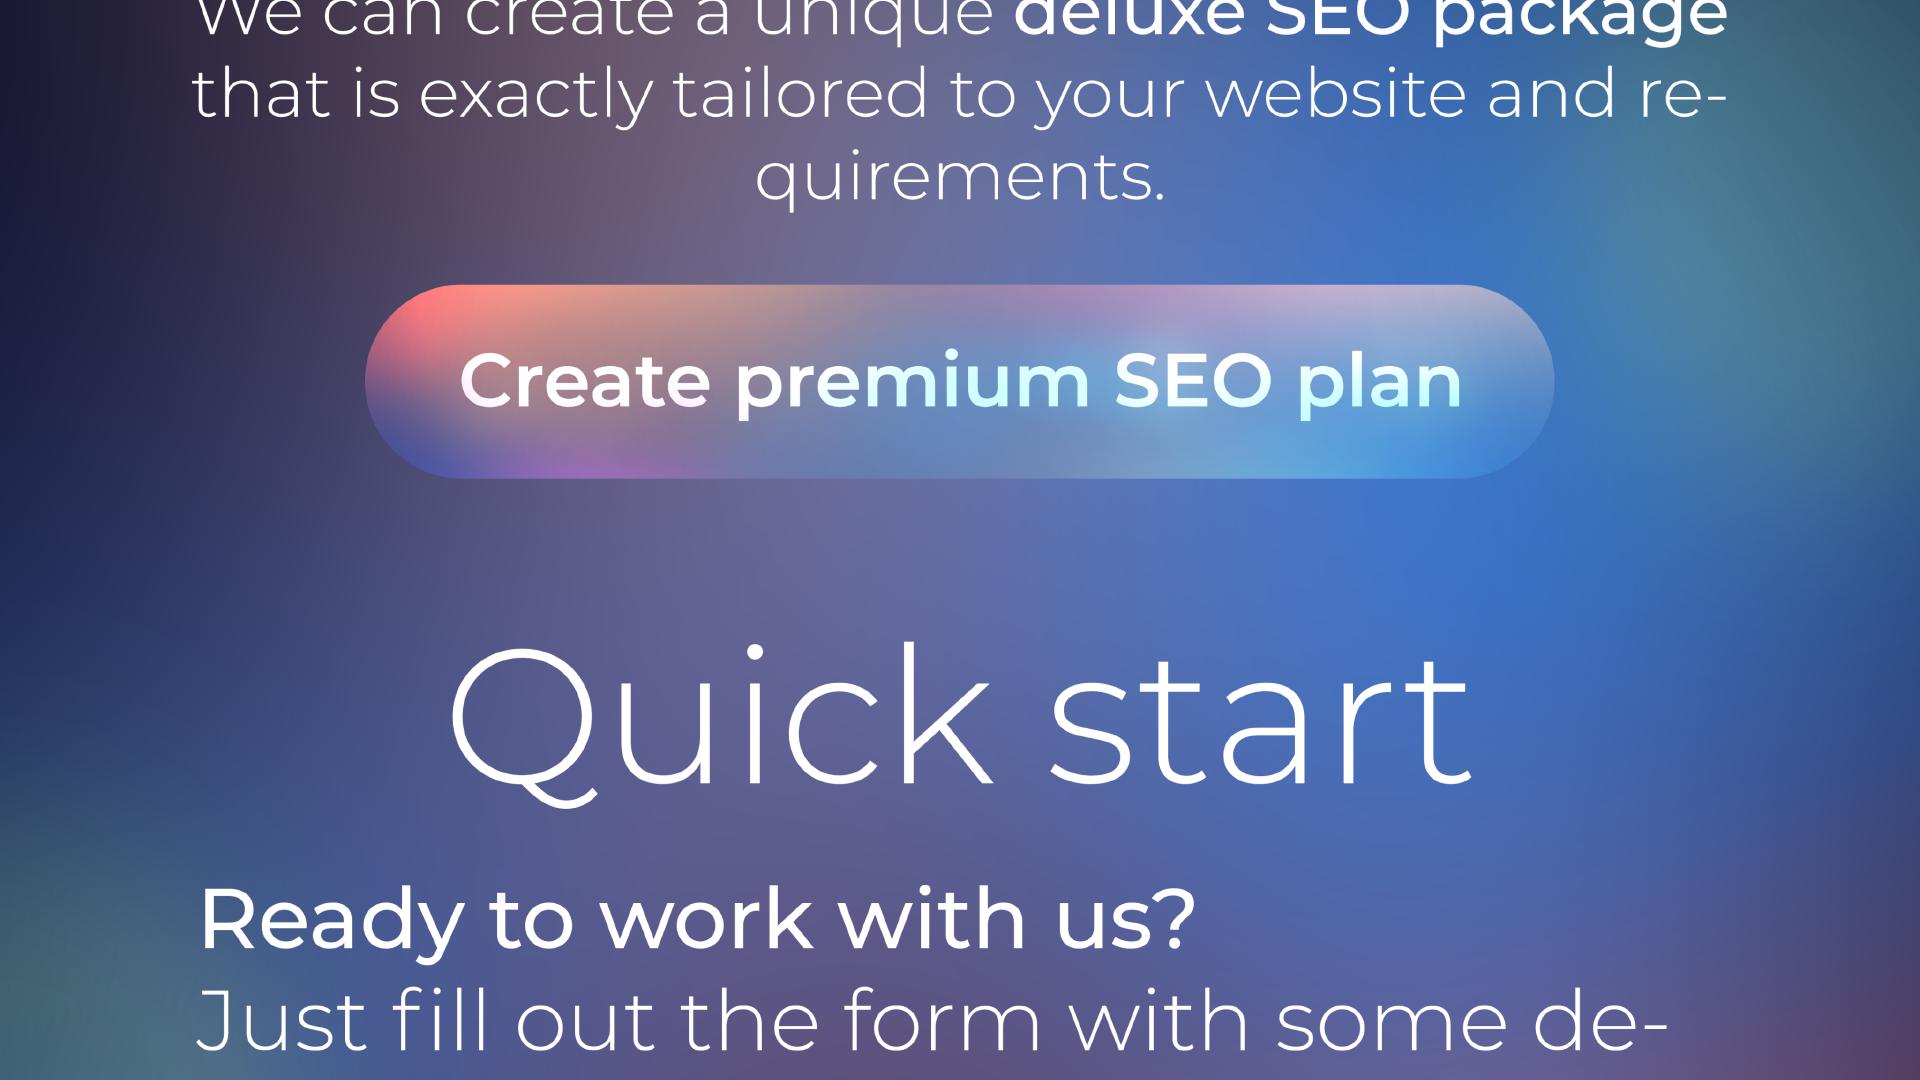 We can create a unique deluxe SEO package that is exactly tailored to your website and requirements. Create premium SEO plan. Quick start. Ready to work with us? 